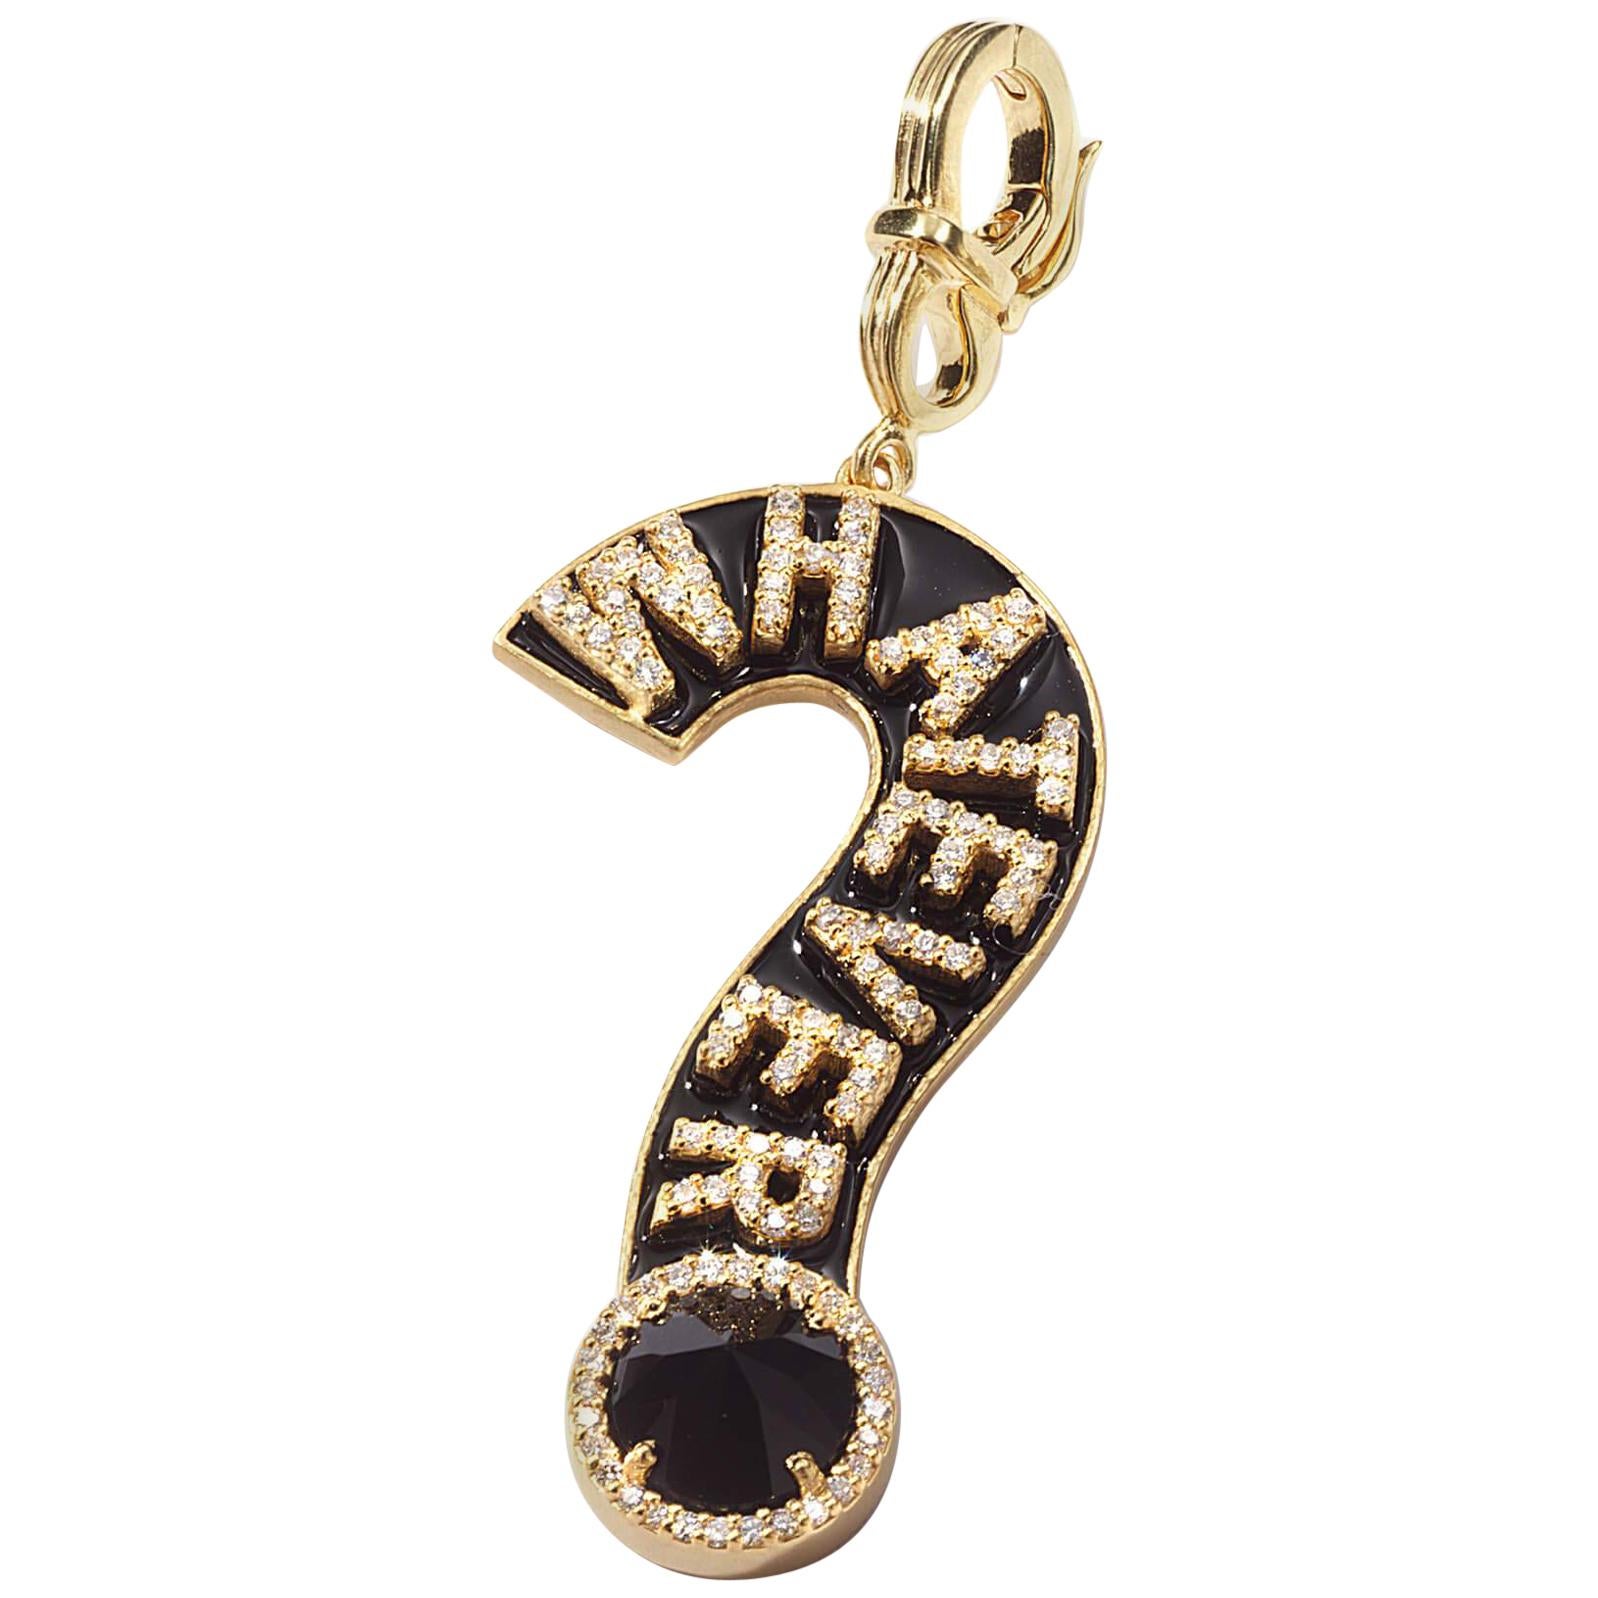 Coomi "Whatever" Question Mark Pendant Set in 20 Karat Gold For Sale